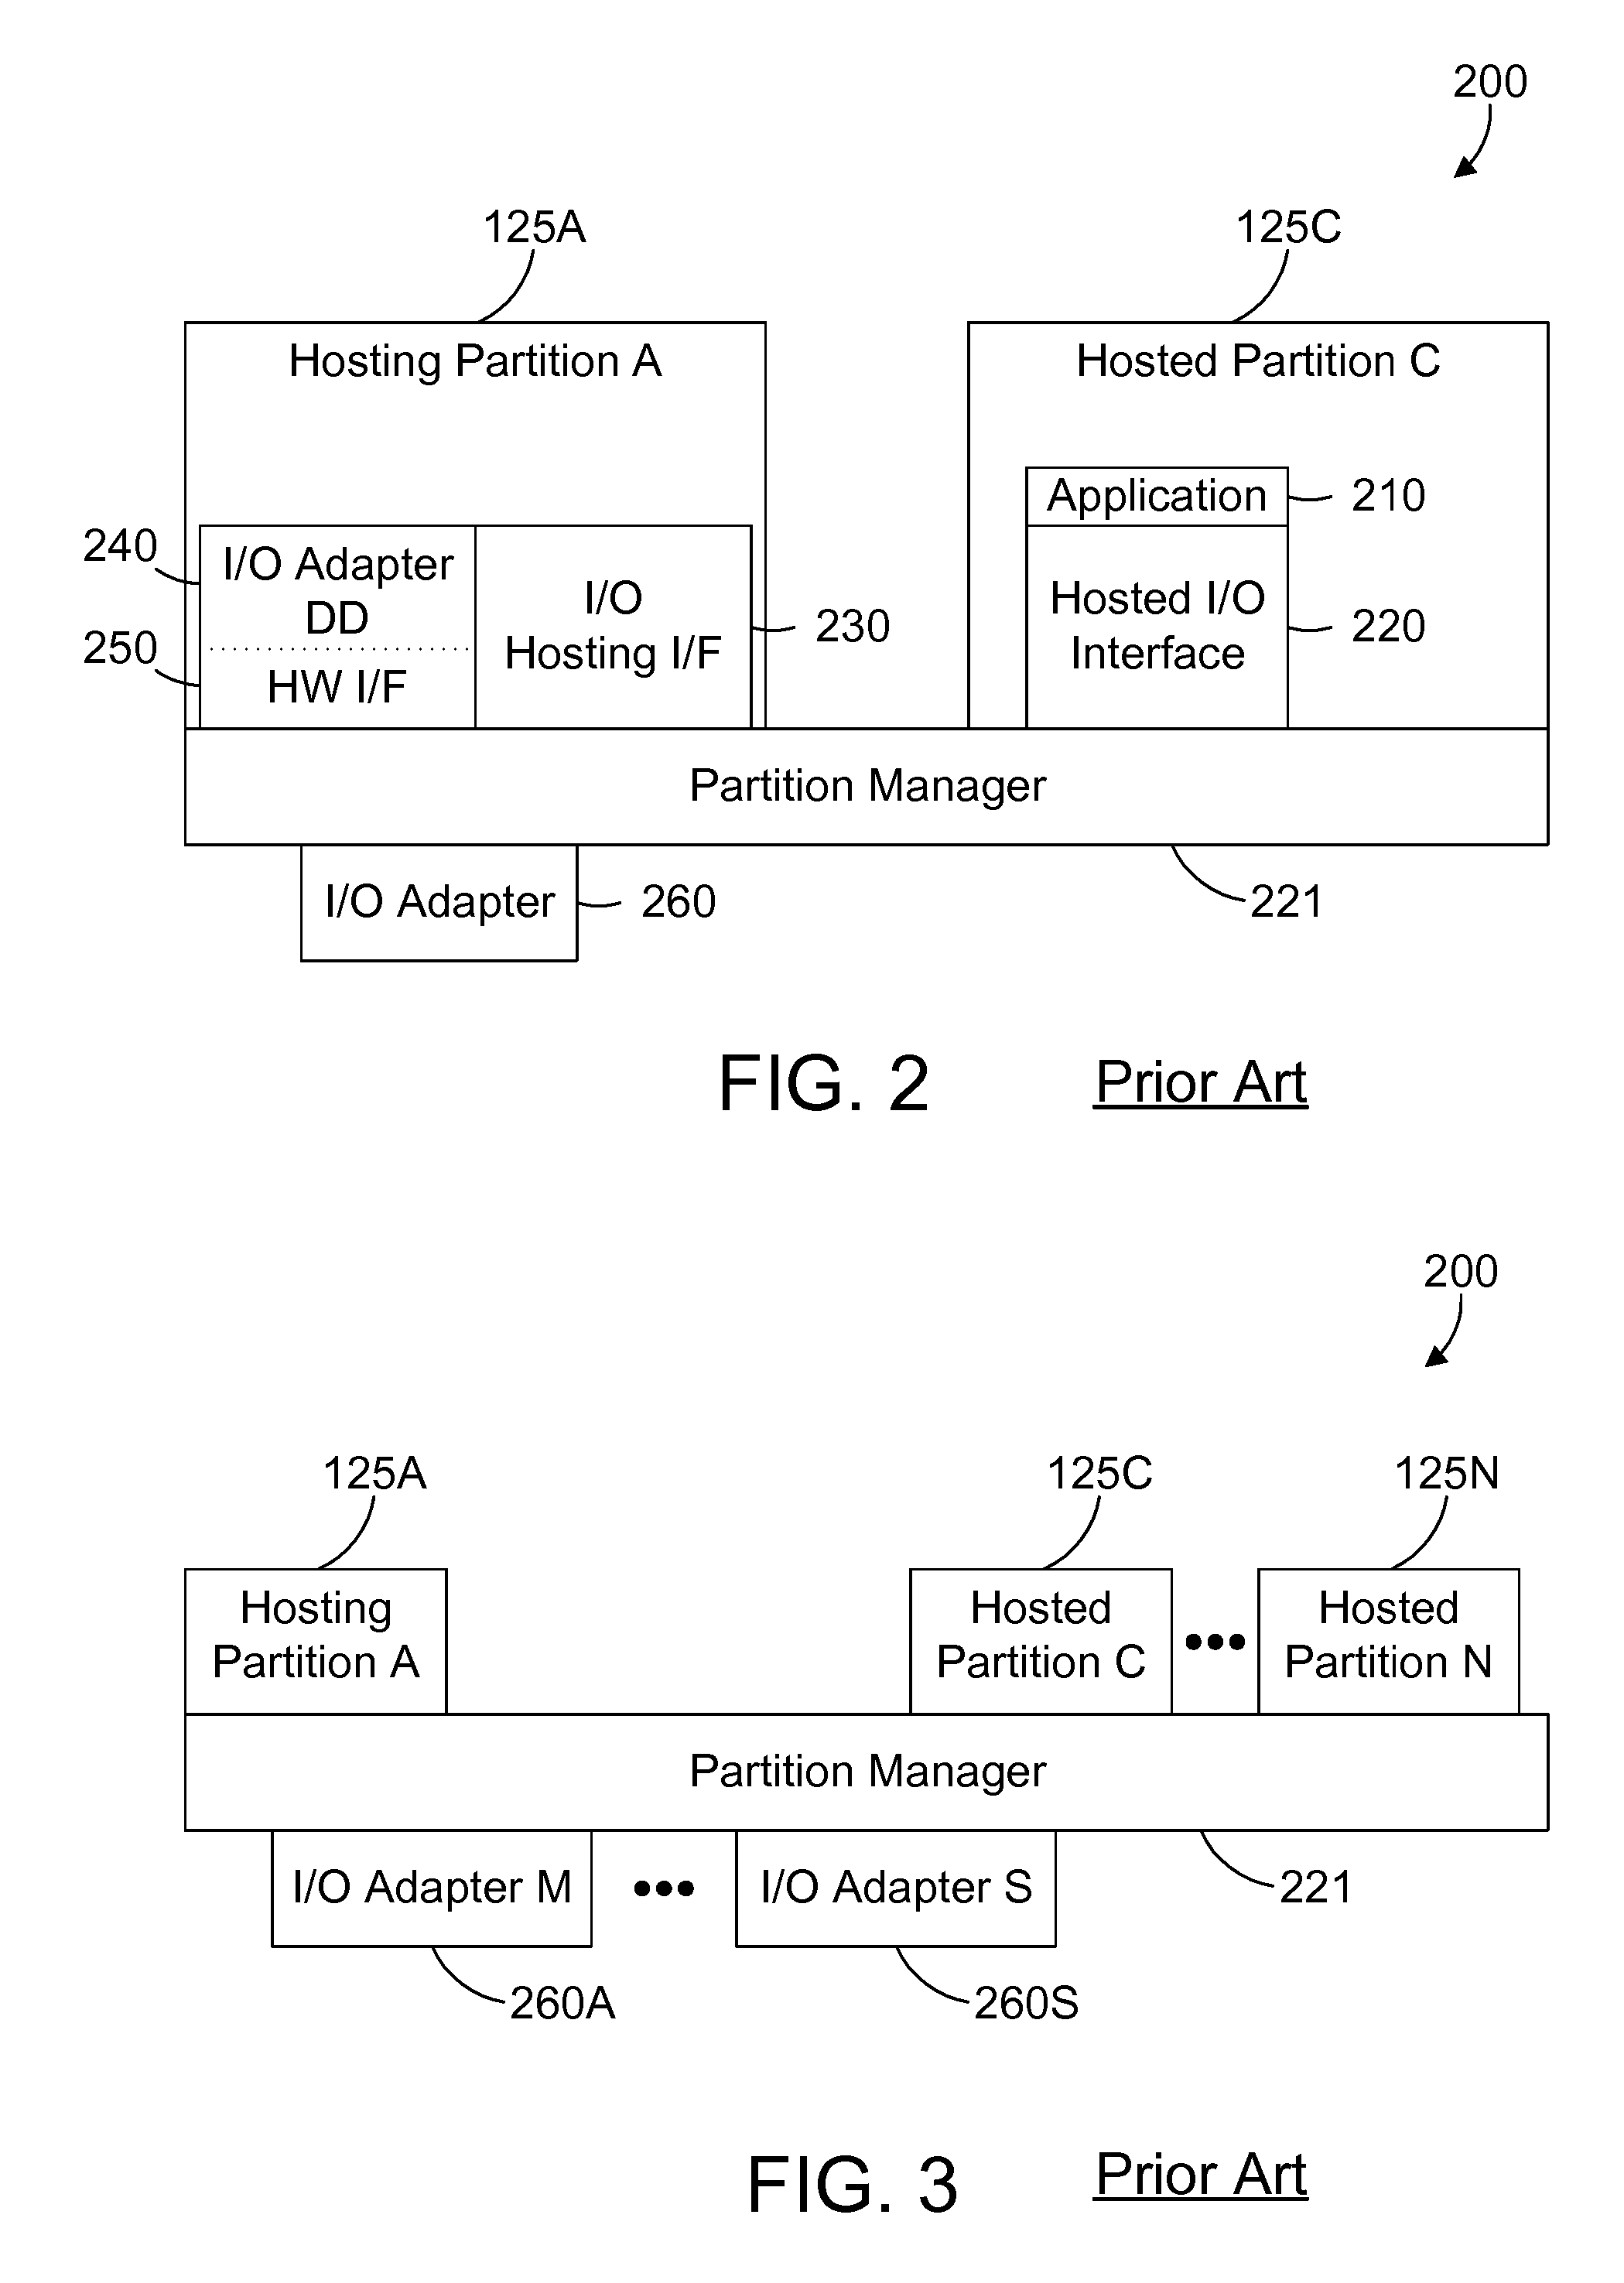 Apparatus and method for updating I/O capability of a logically-partitioned computer system